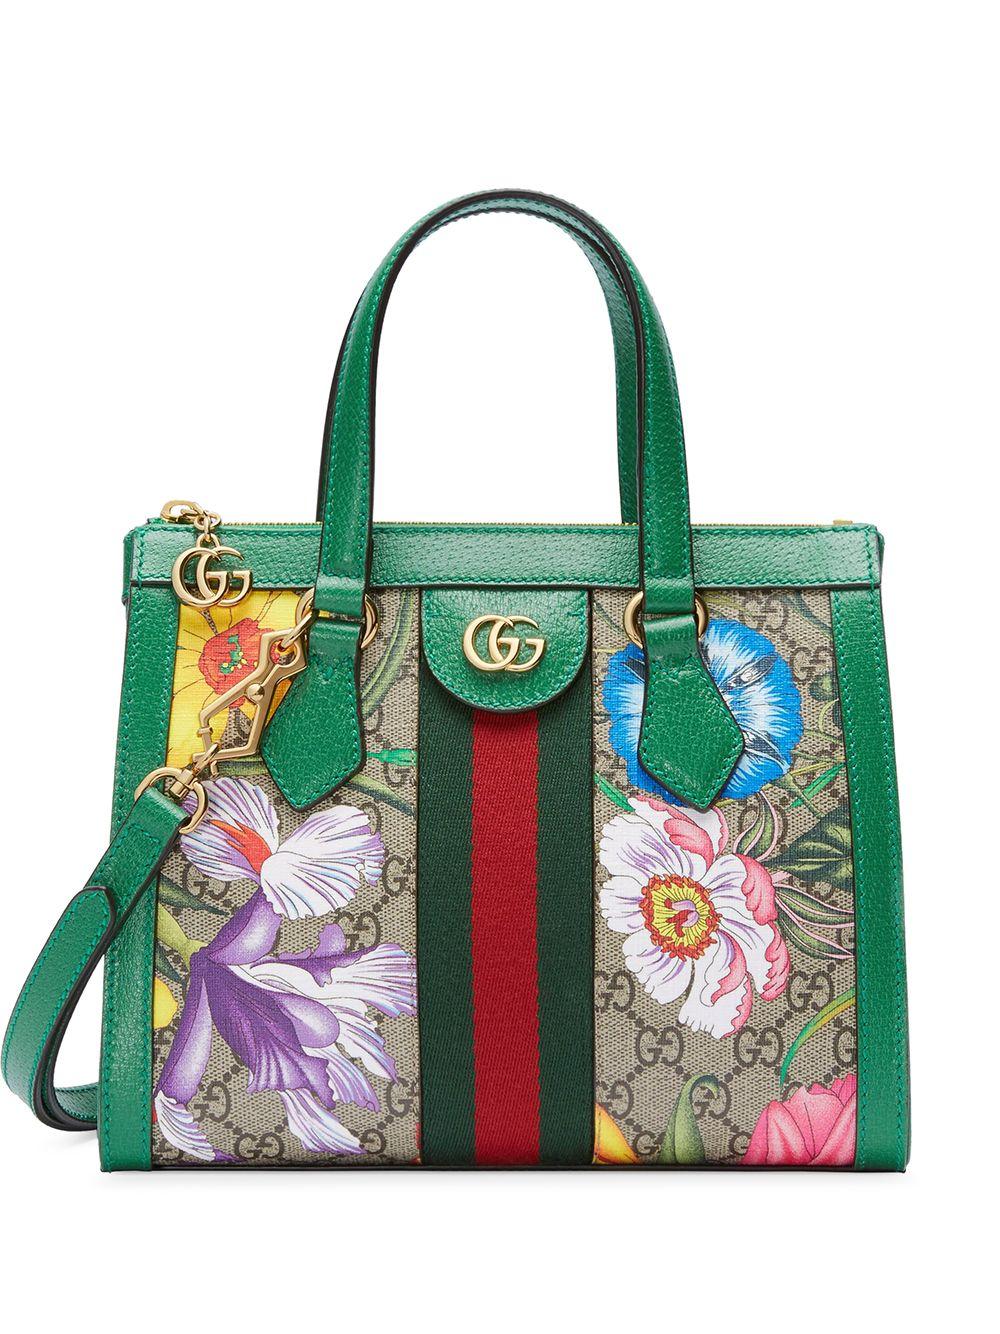 Gucci Canvas Ophidia Floral Pattern Tote Bag in Green | Lyst